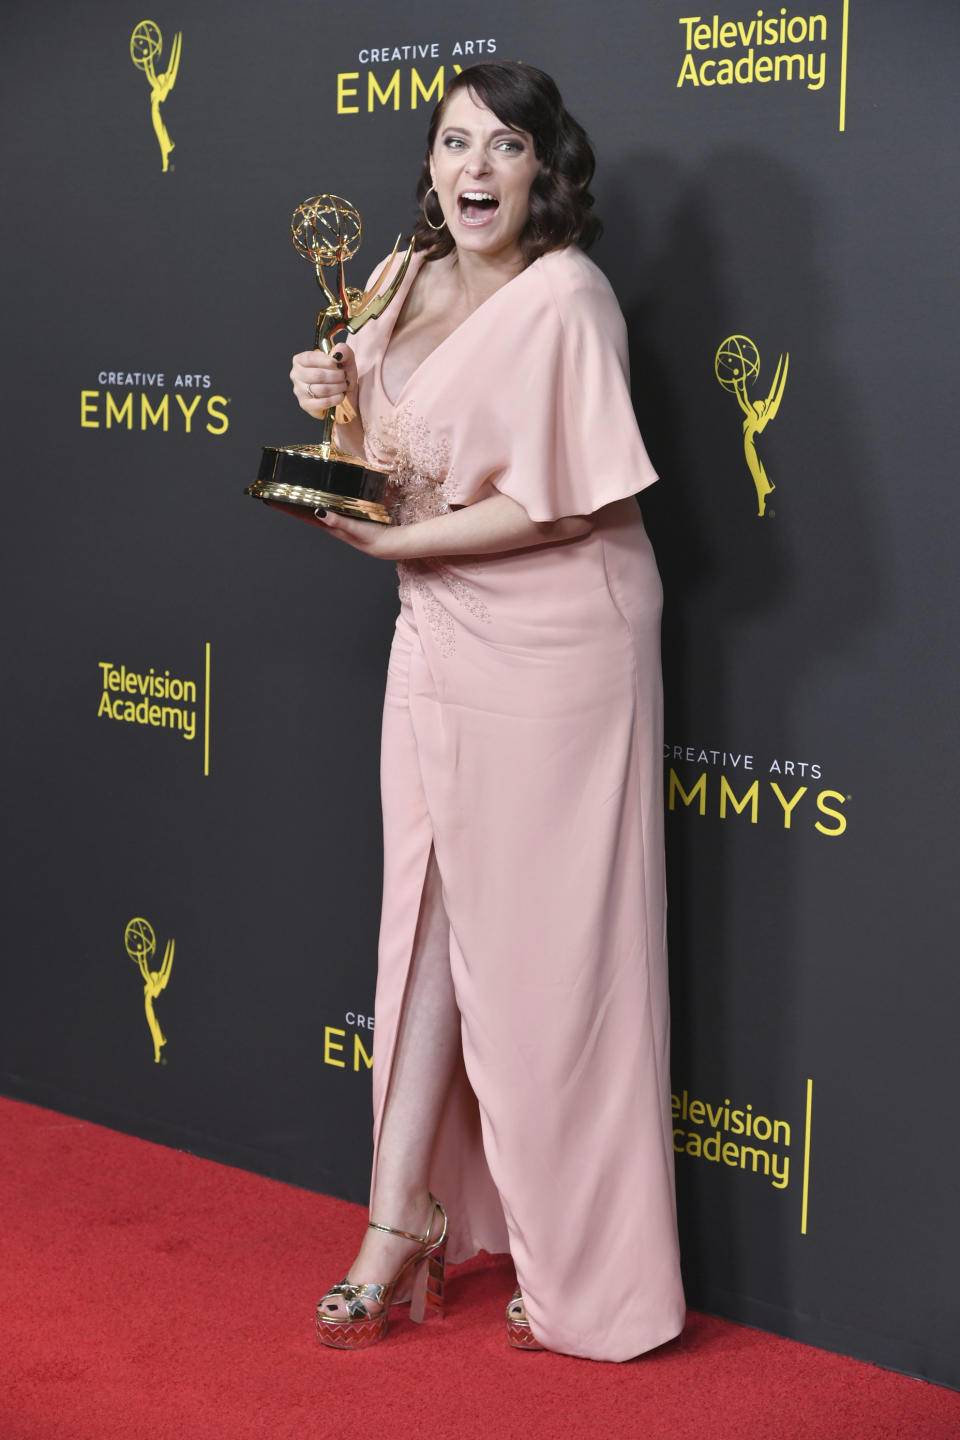 Rachel Bloom poses in the press room with the award for outstanding original music and lyrics for "Crazy Ex Girlfriend" on night one of the Creative Arts Emmy Awards on Saturday, Sept. 14, 2019, at the Microsoft Theater in Los Angeles. (Photo by Richard Shotwell/Invision/AP)